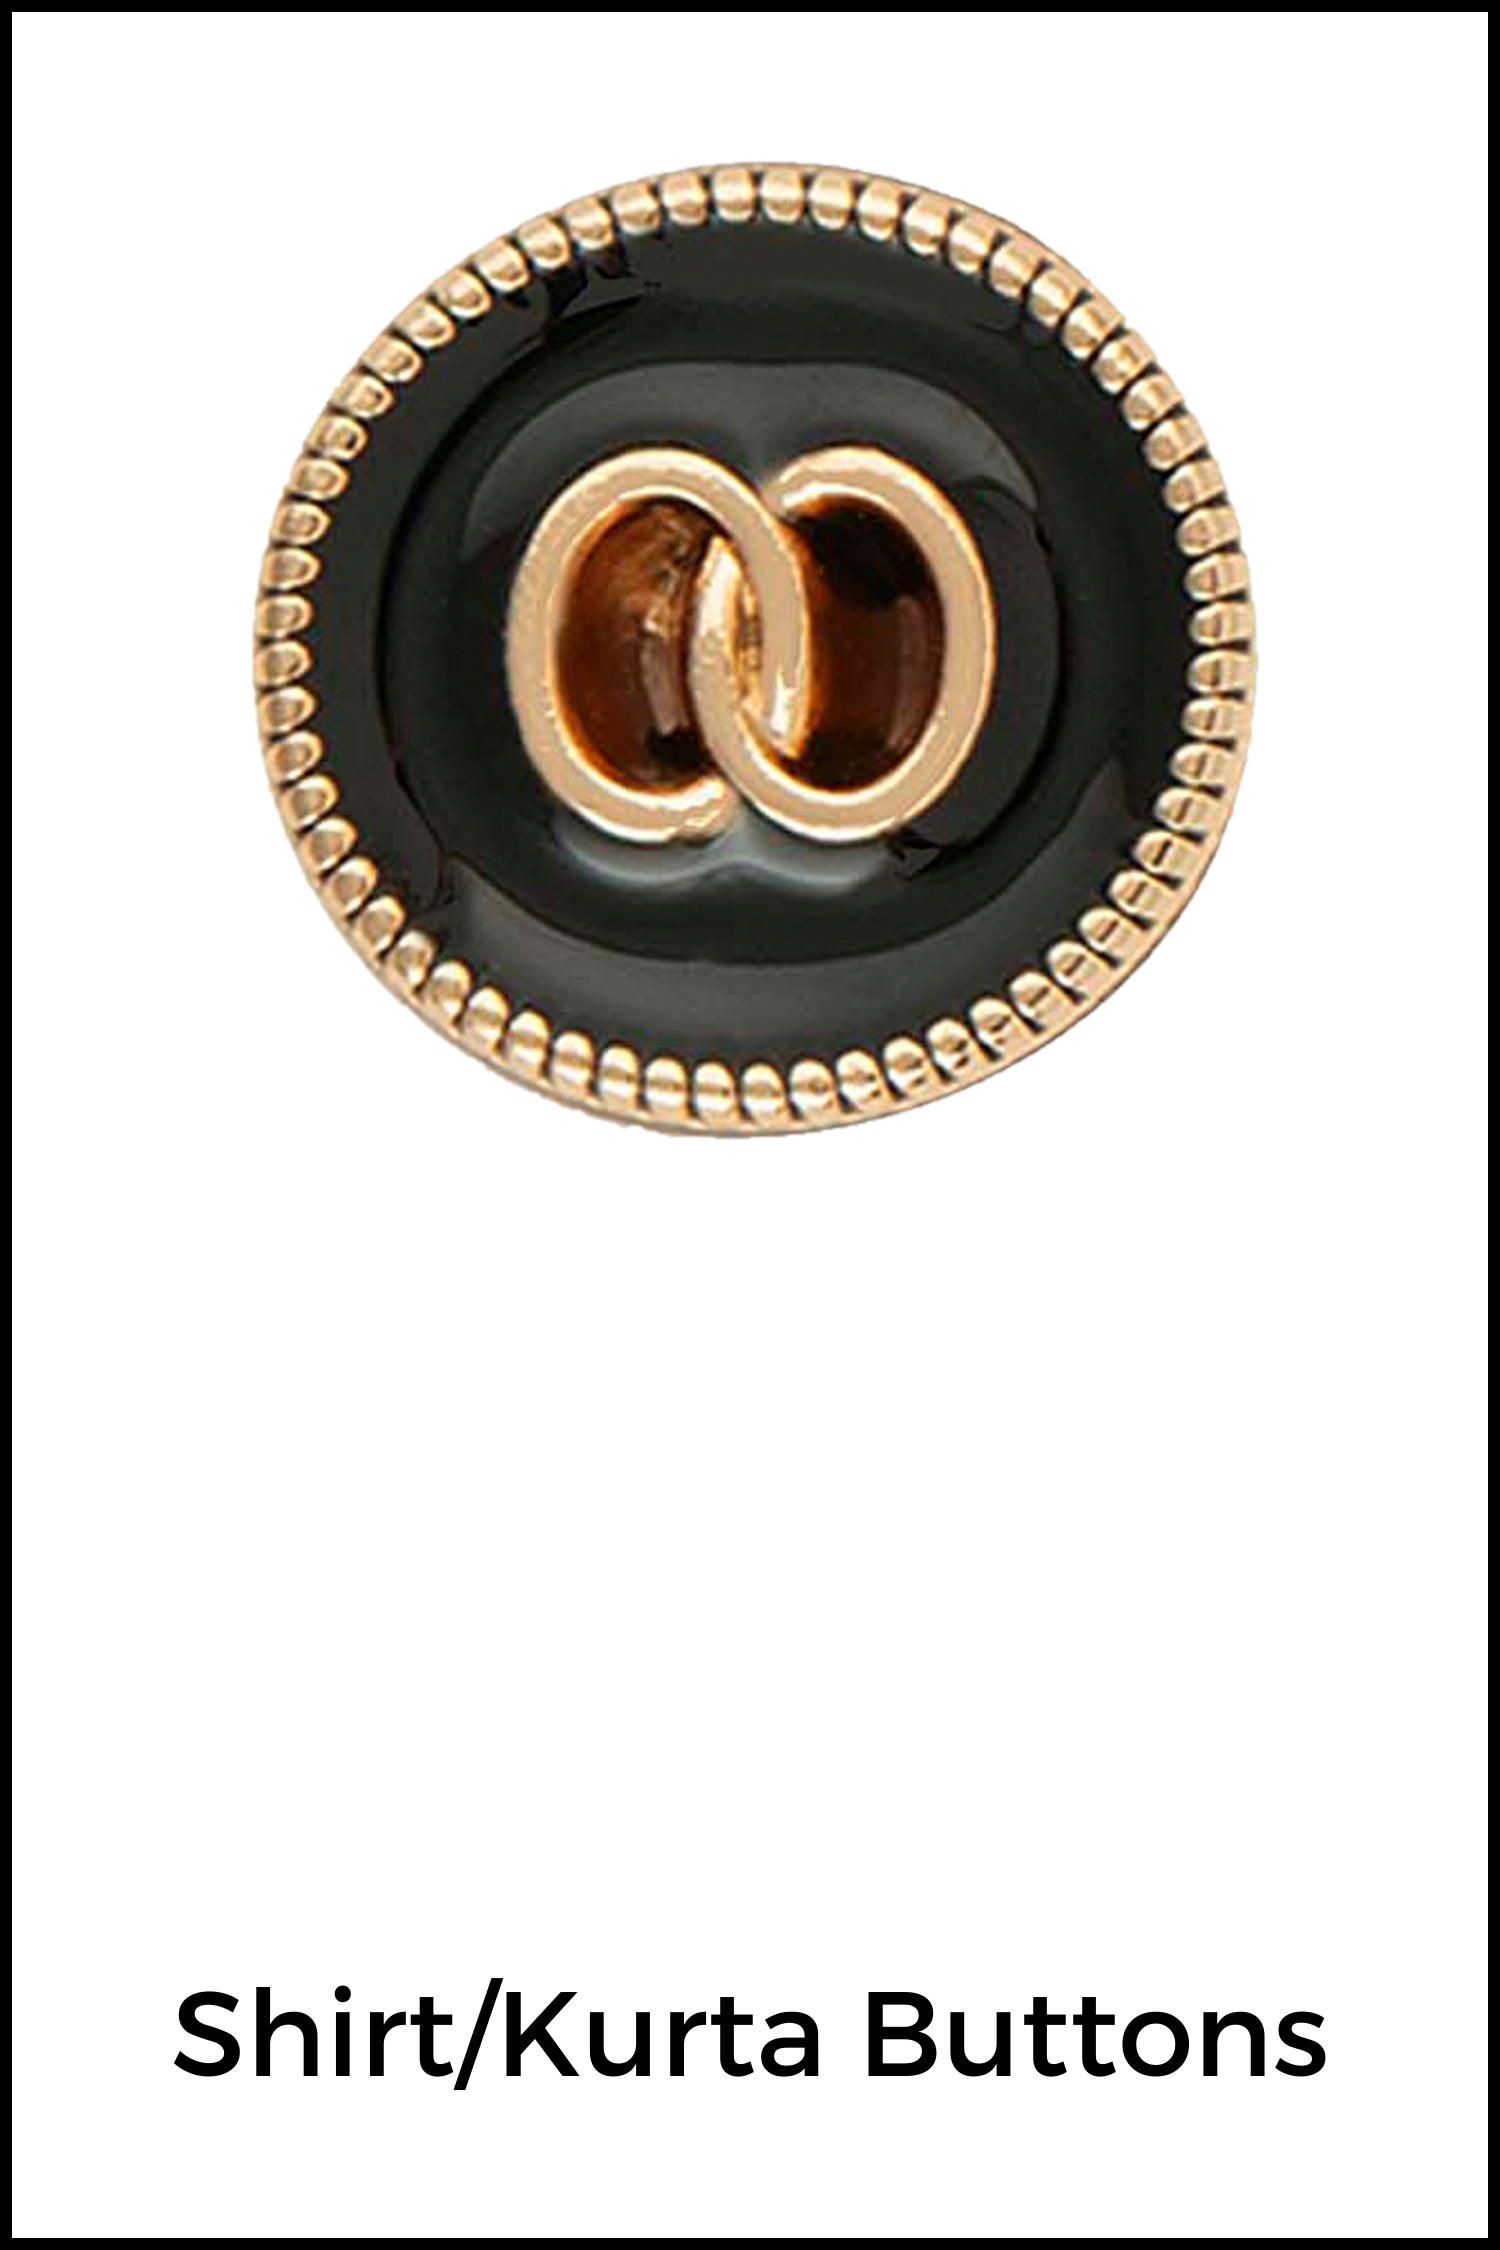 Chanel Elegant Enamel Buttons for Luxury Clothes Suppliers from